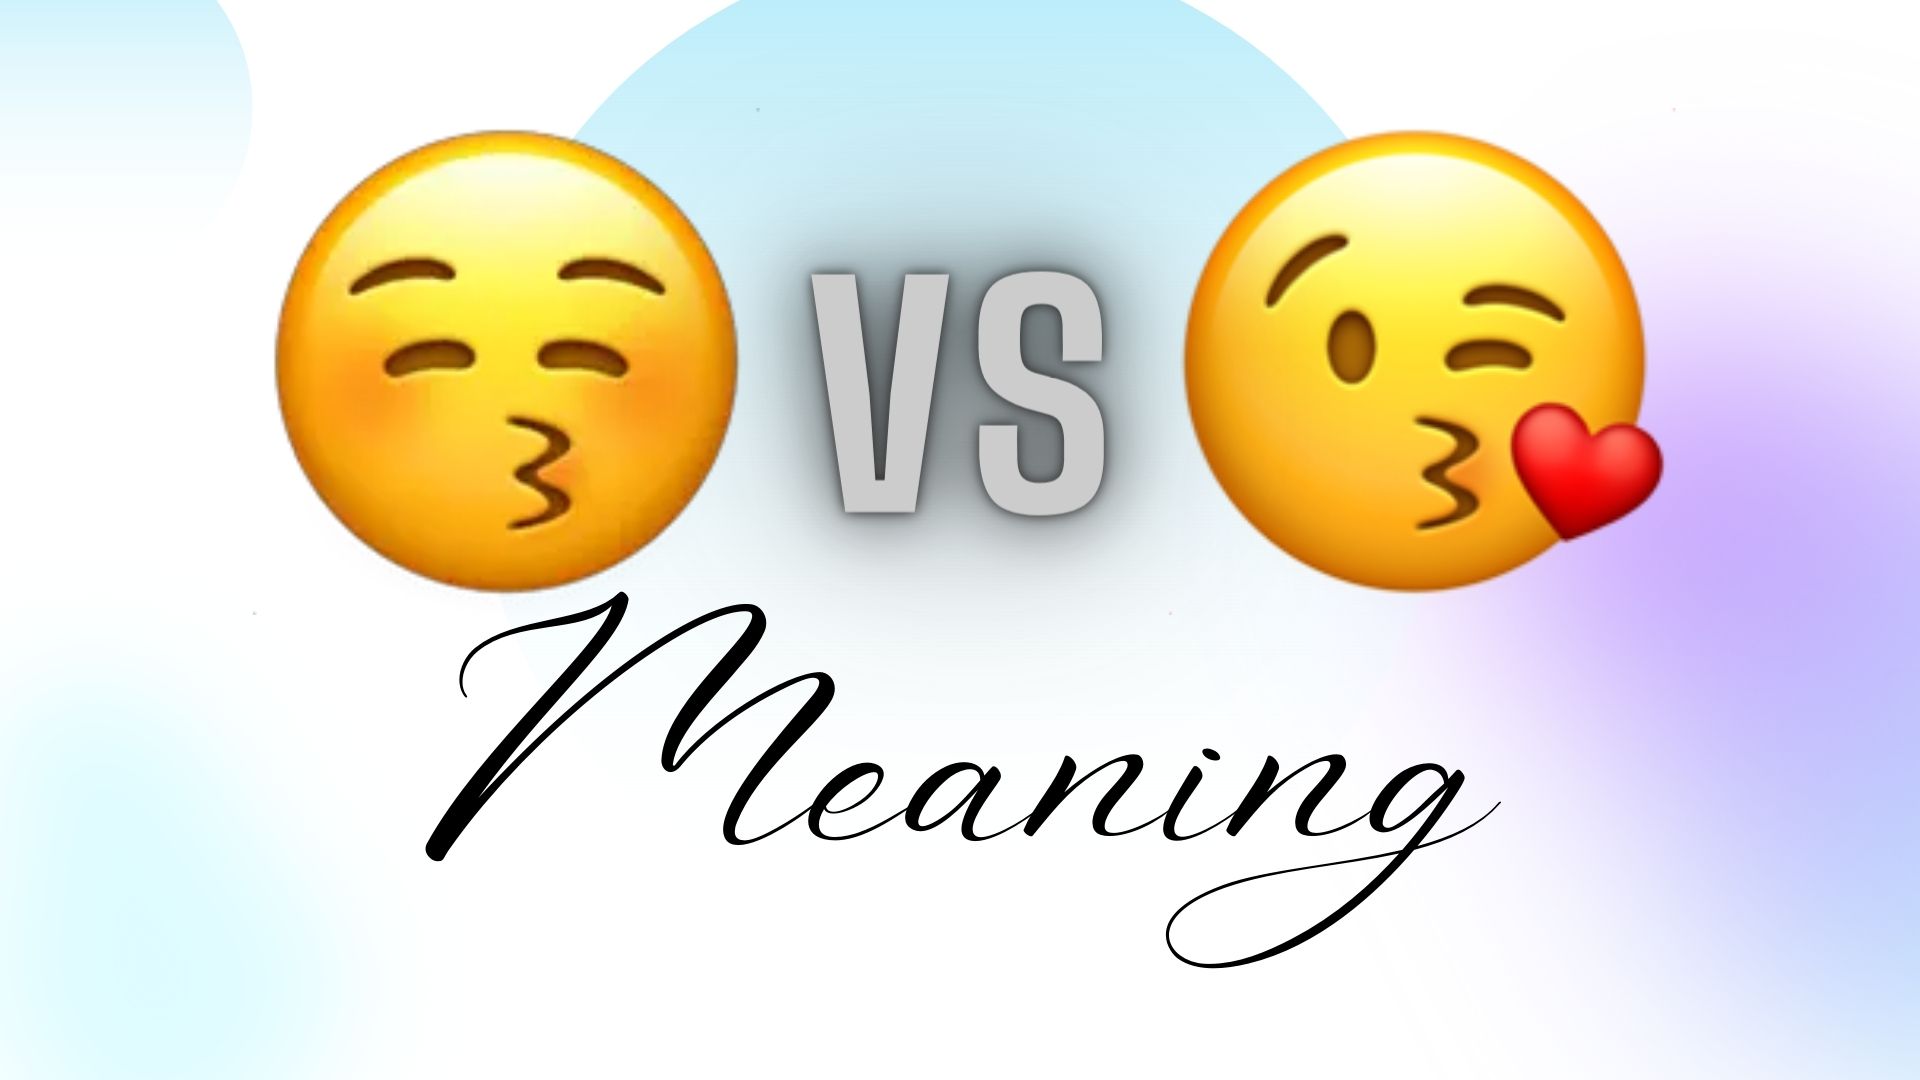 😚 vs 😘 meaning